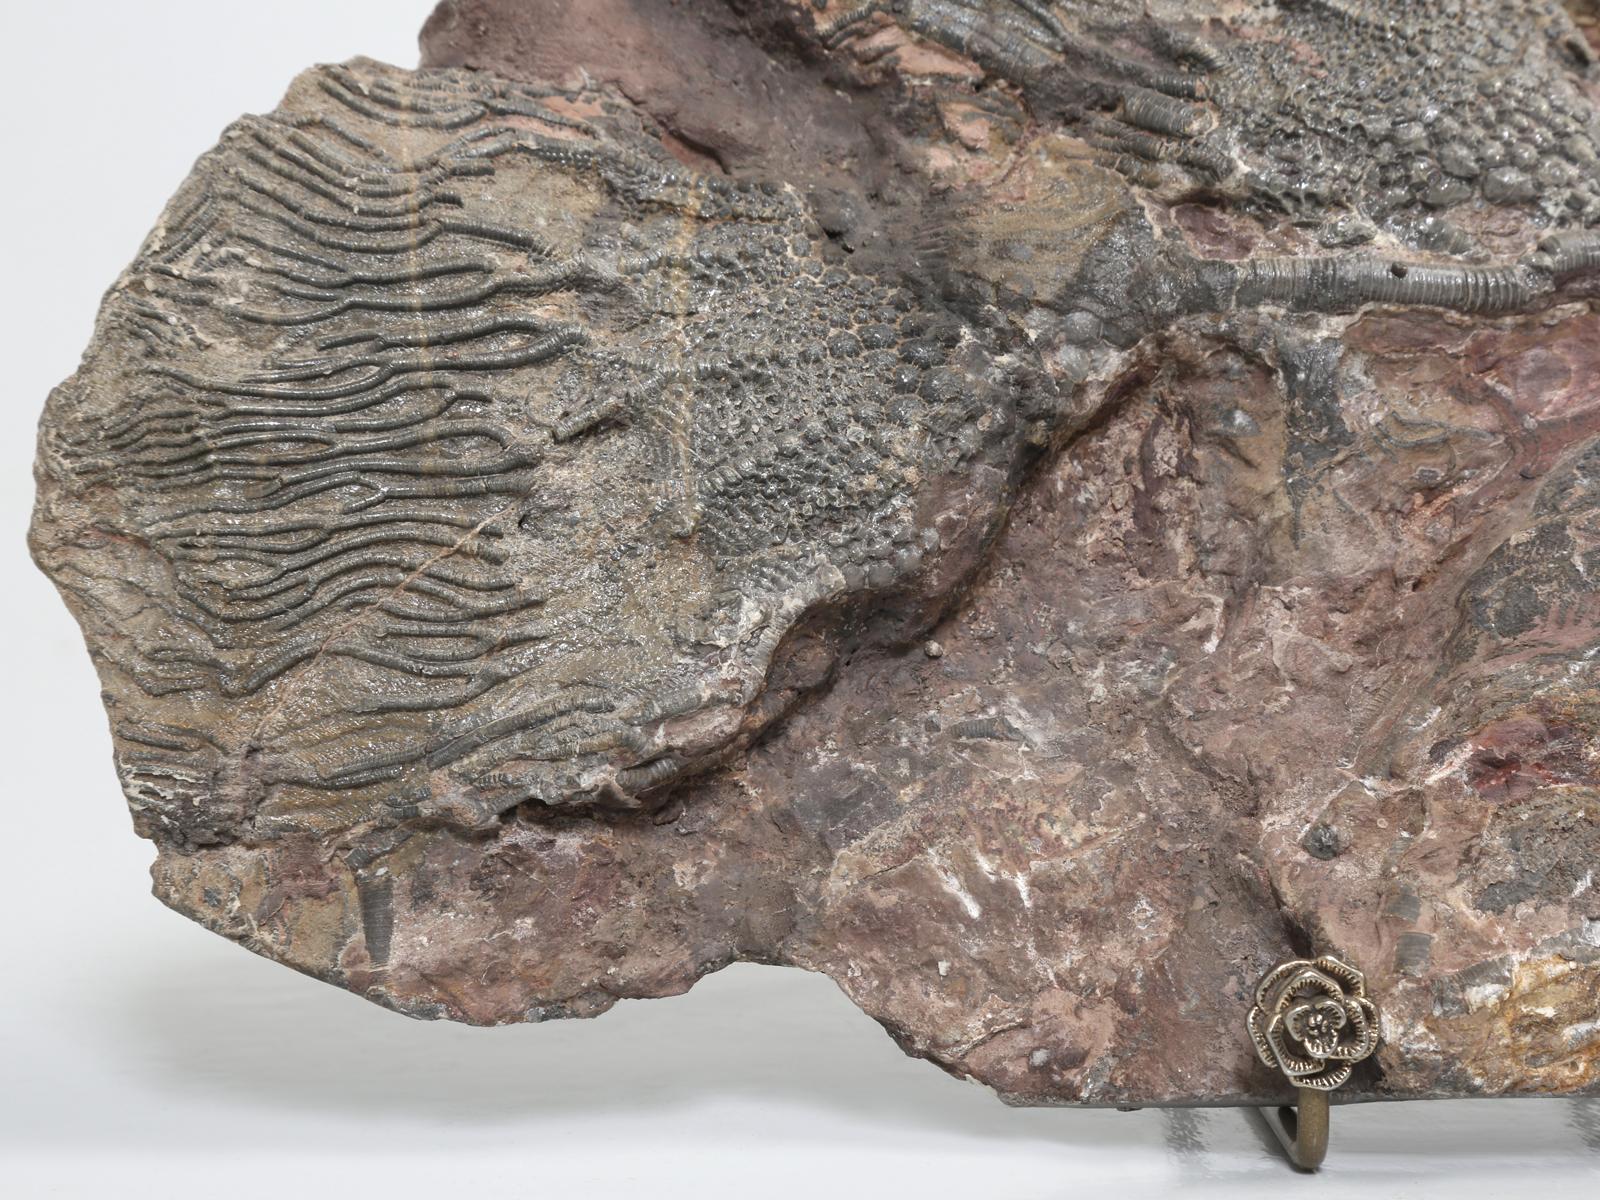 Crinoid fossils are more commonly known as sea lilies which are members of the Echinodermata phylum, starfish and sea urchins. Our particular Crinoid plate fossil originates from Morocco, where our old friend searches for them. They look more like